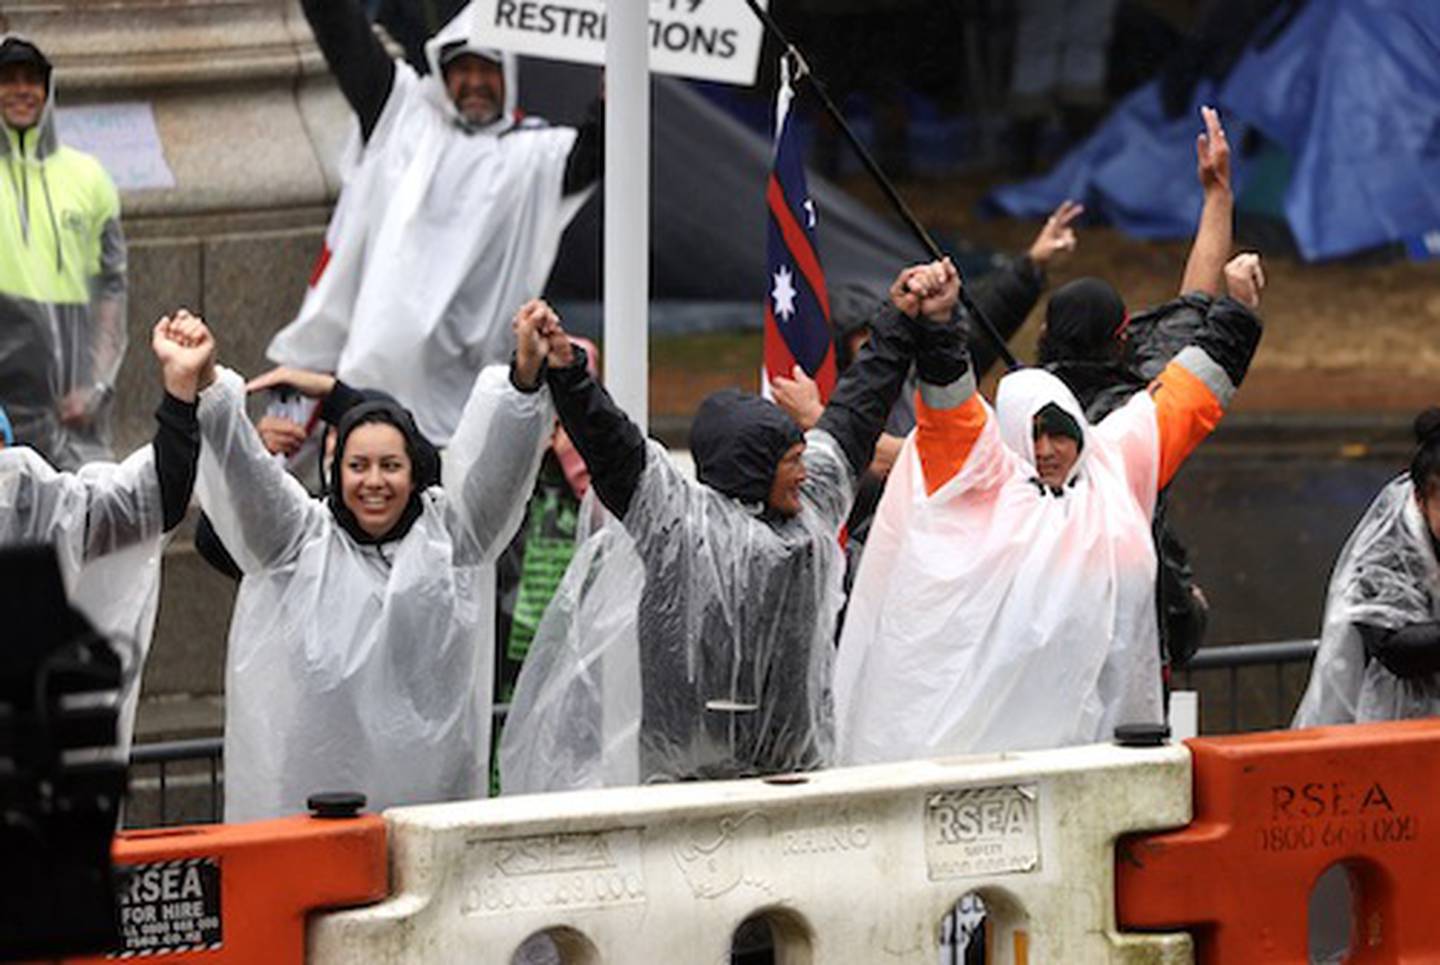 Protesters in the rain on Sunday morning. Photo / George Heard